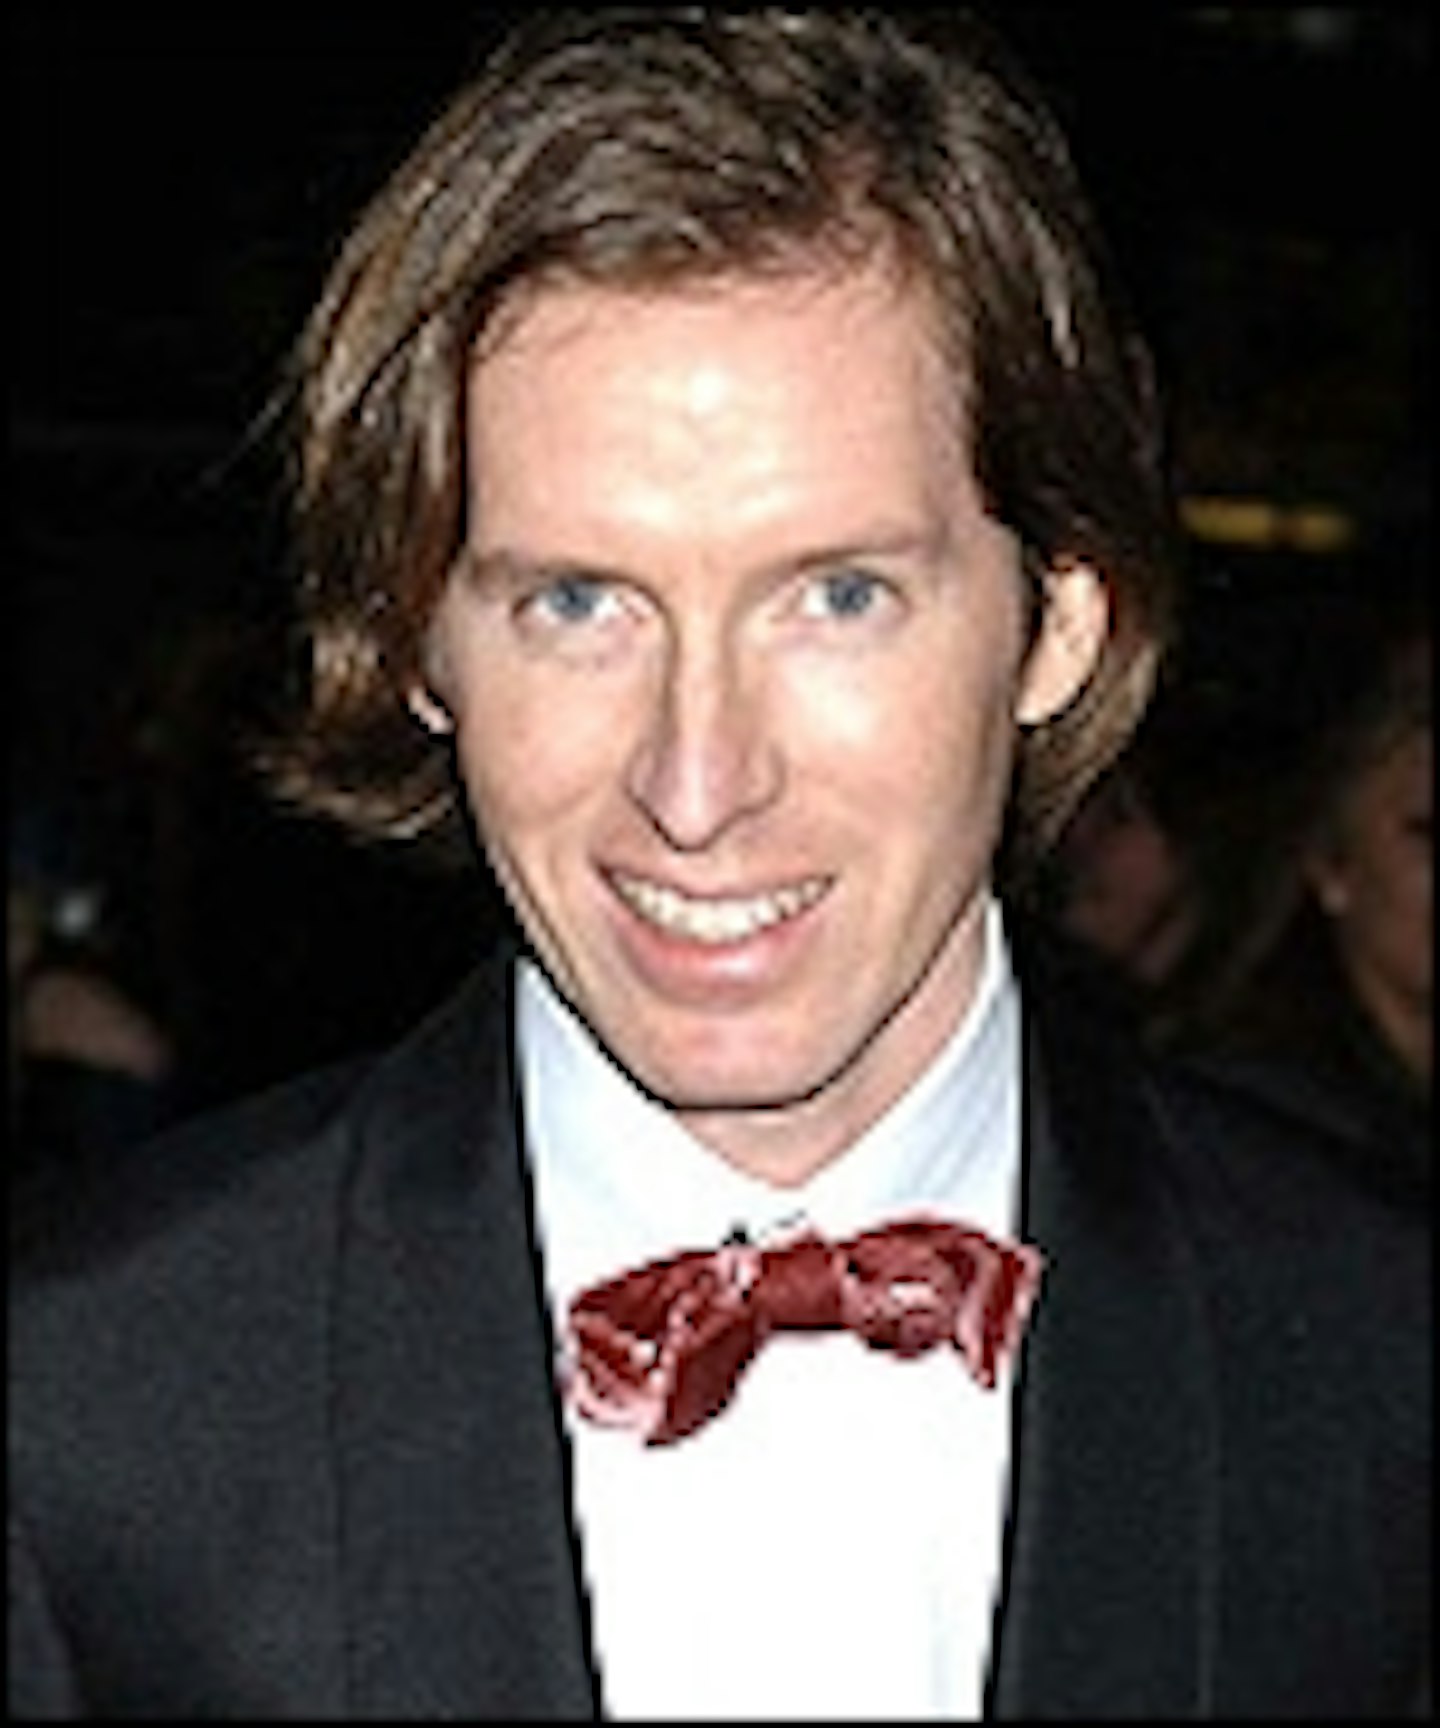 Wes Anderson Among Directors Guild Of America Award Nominees